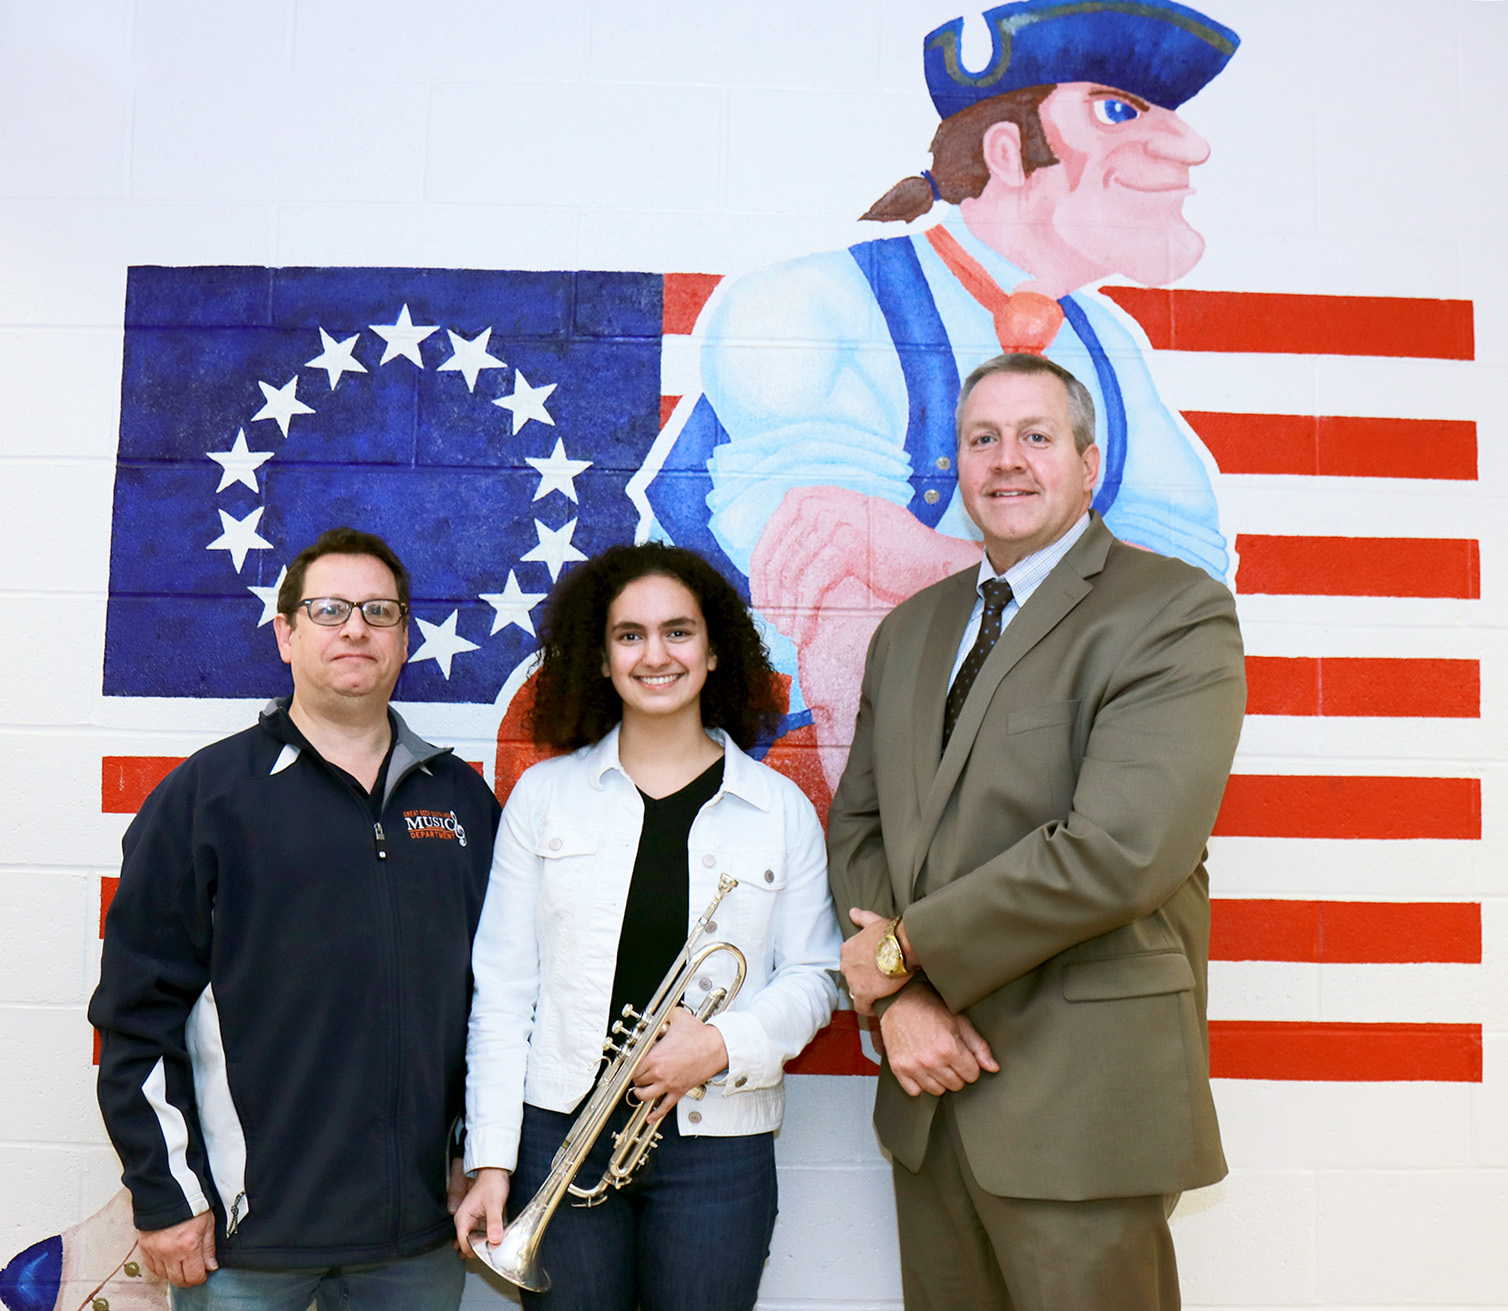 Sophia Wotman is congratulated by South High School Performing Arts Department Head Michael Schwartz and Principal Christopher Gitz. (Photo courtesy of the Great Neck Public Schools)